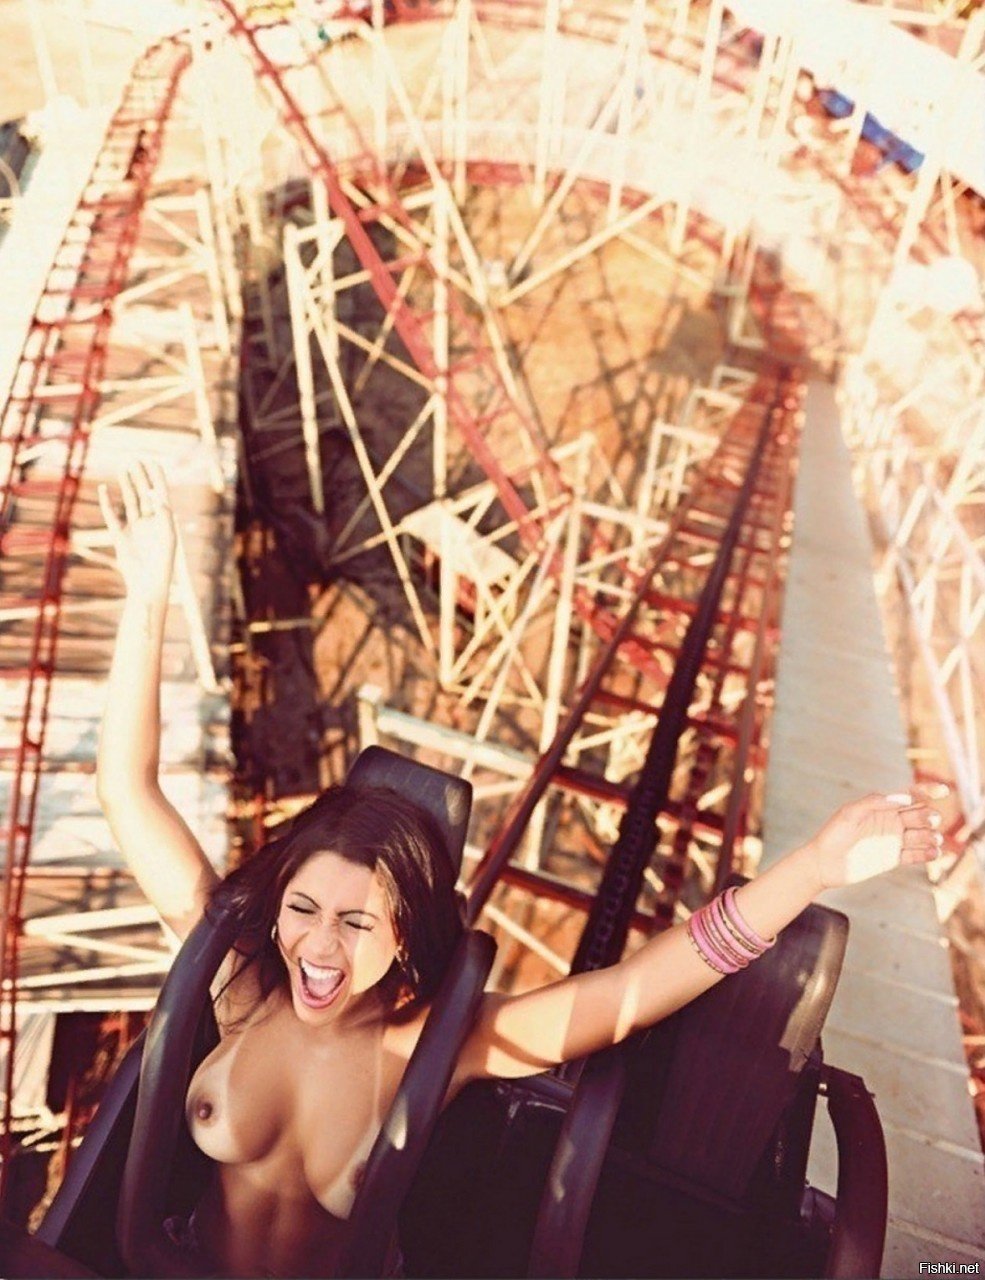 Tits out rollercoaster